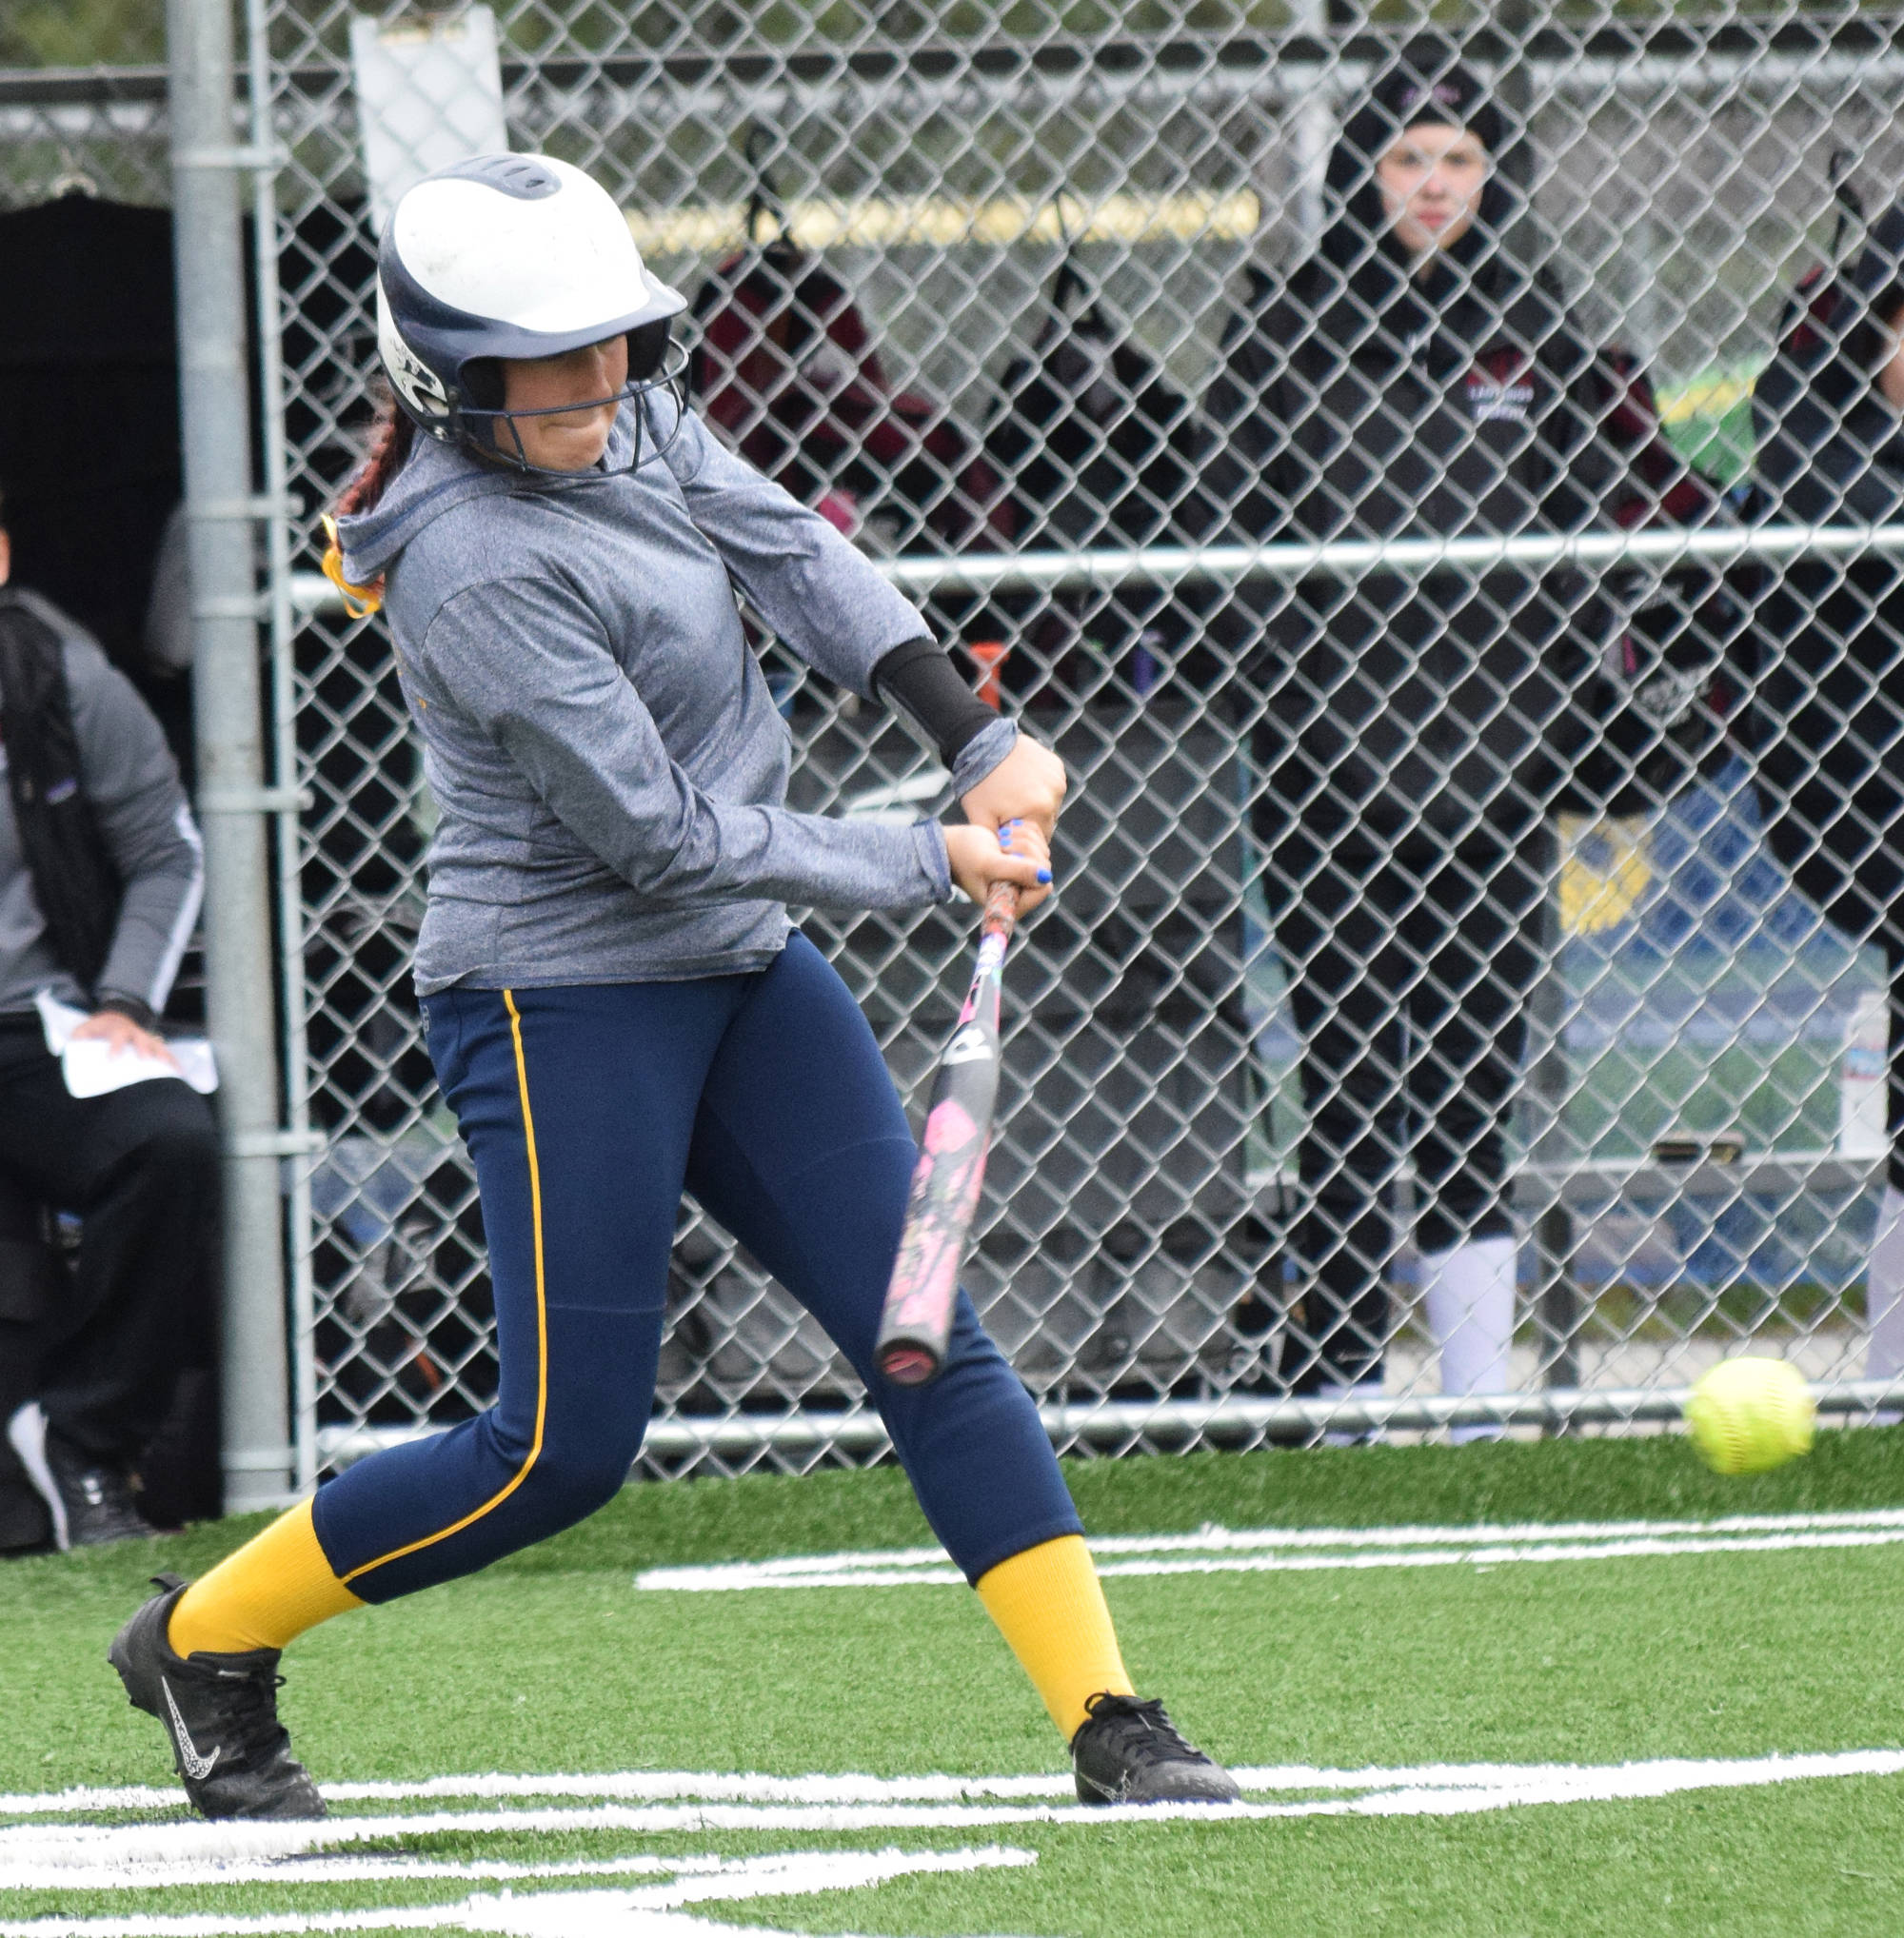 Homer’s Haylee Owen takes a swing at a pitch from Ketchikan at the Division II state softball tournament Saturday, June 1, 2019, at Cartee Fields in Anchorage. (Photo by Joey Klecka/Peninsula Clarion)